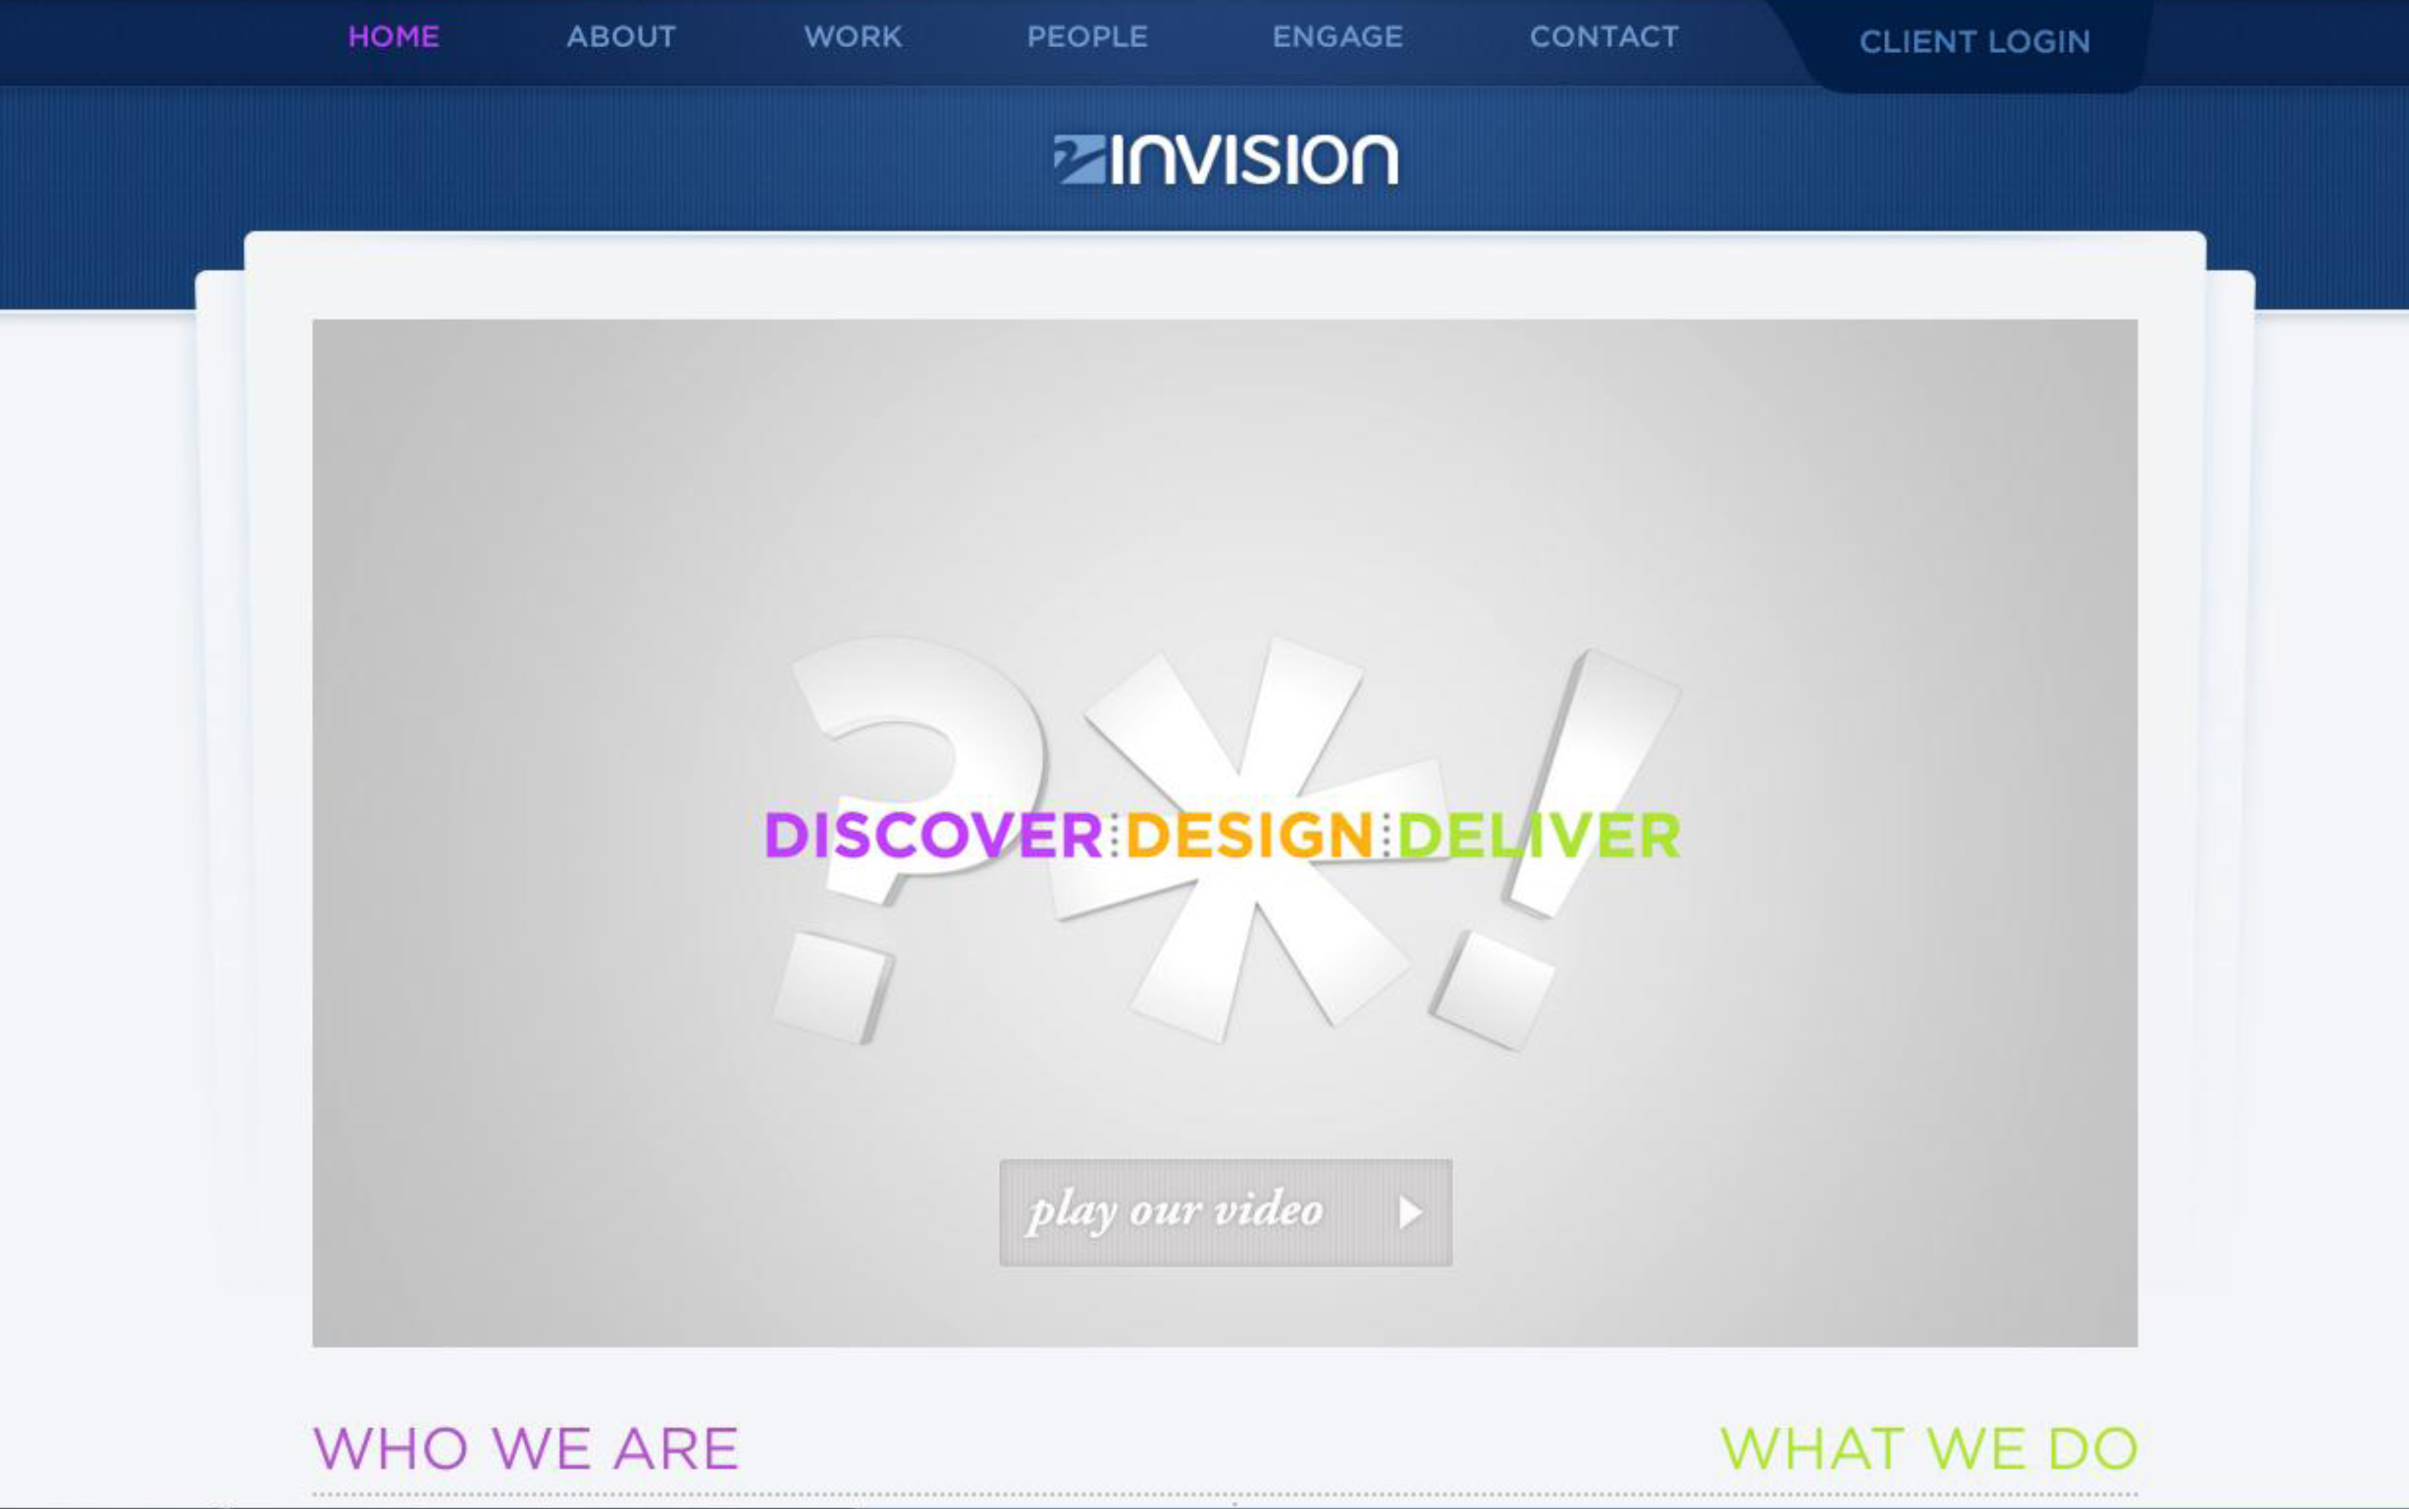 Engage with InVision image